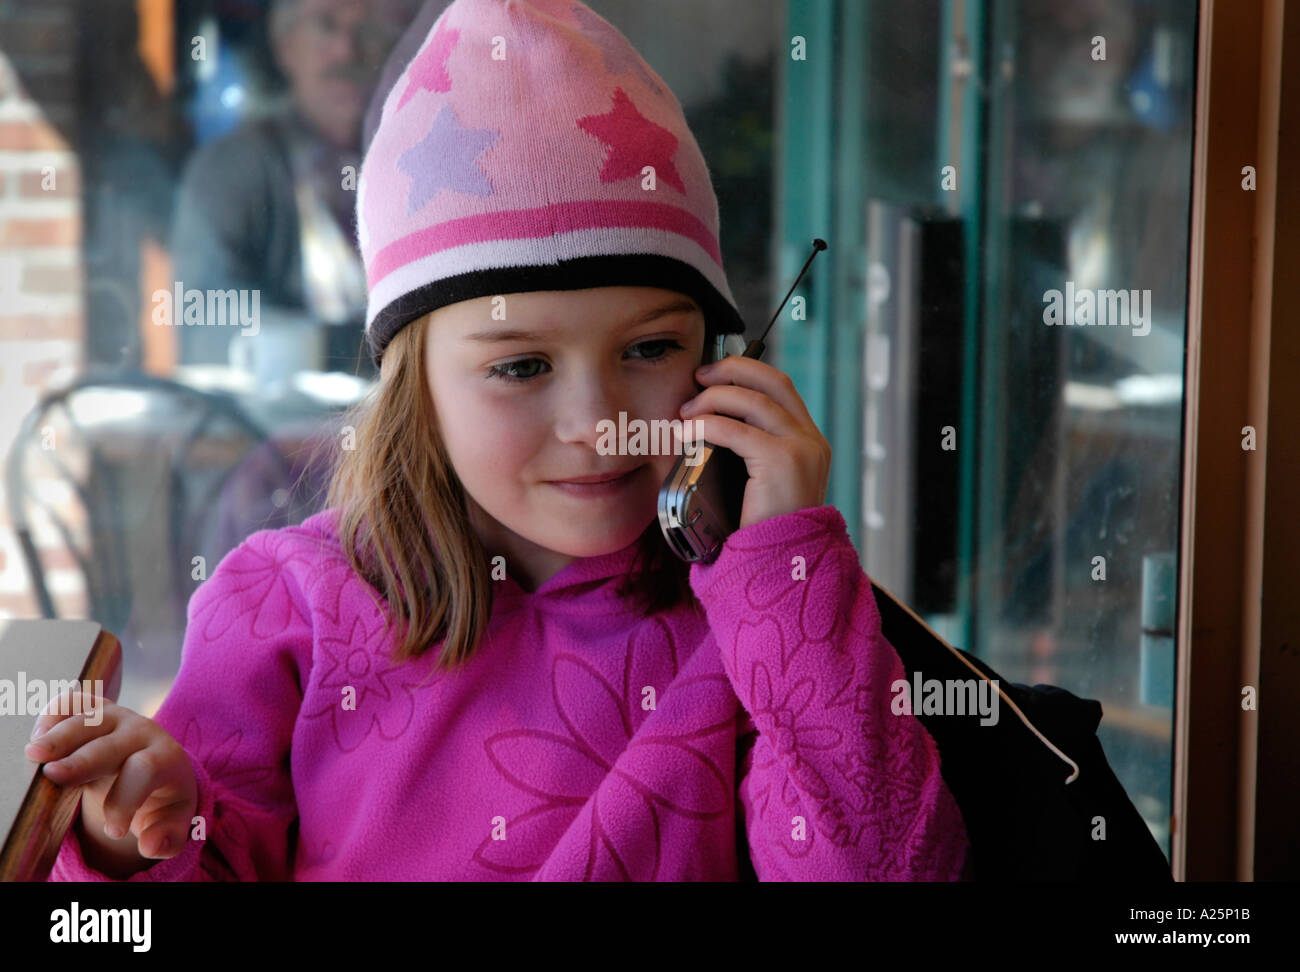 A five year old girl in toque stocking cap and purple shirt listening to her mother on the cell phone Stock Photo